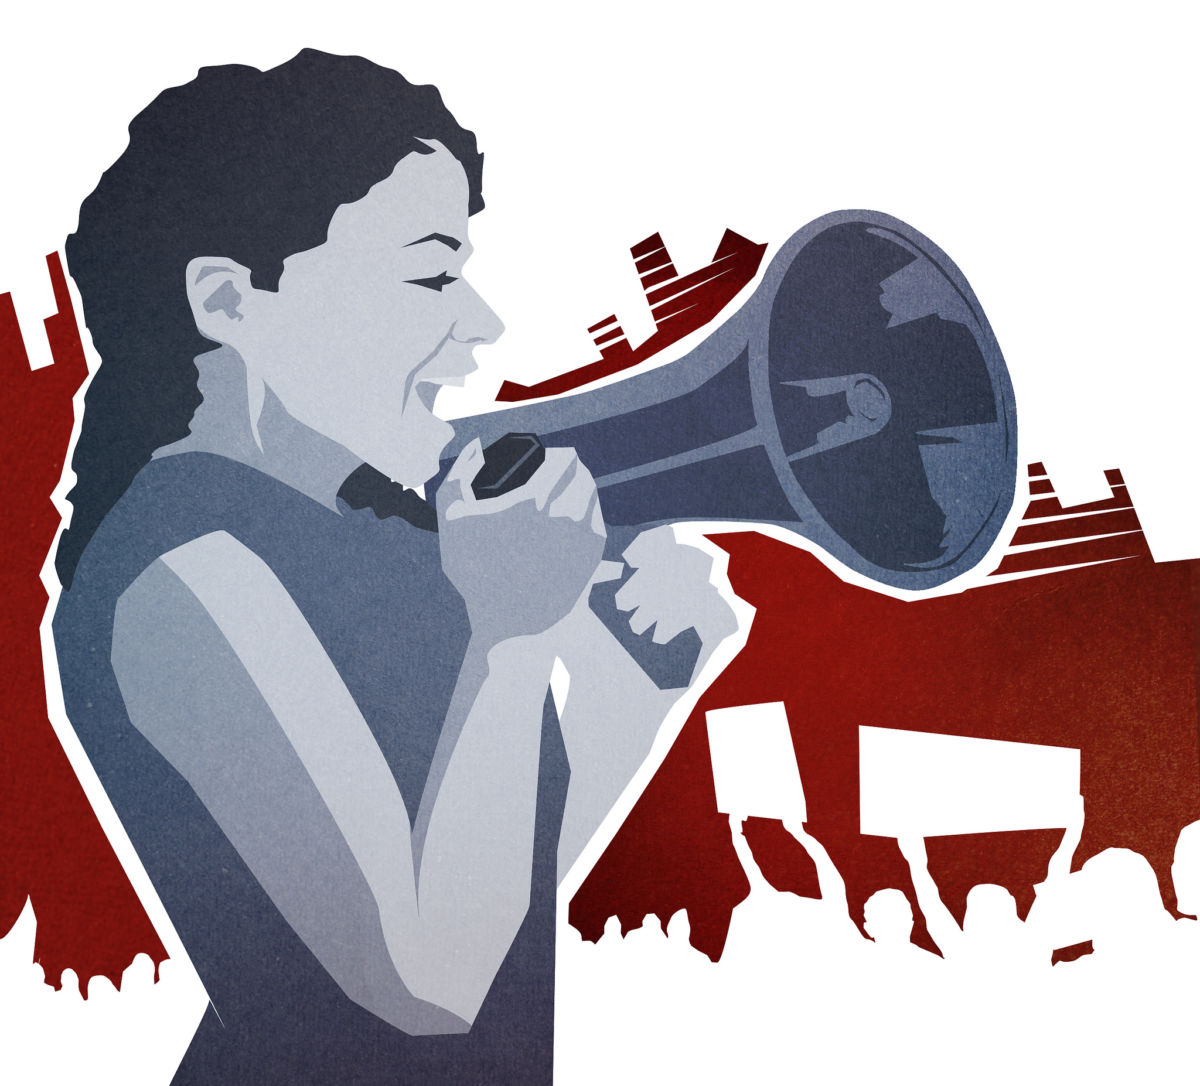 A woman holds a megaphone in front of a mass gathering of resistors.